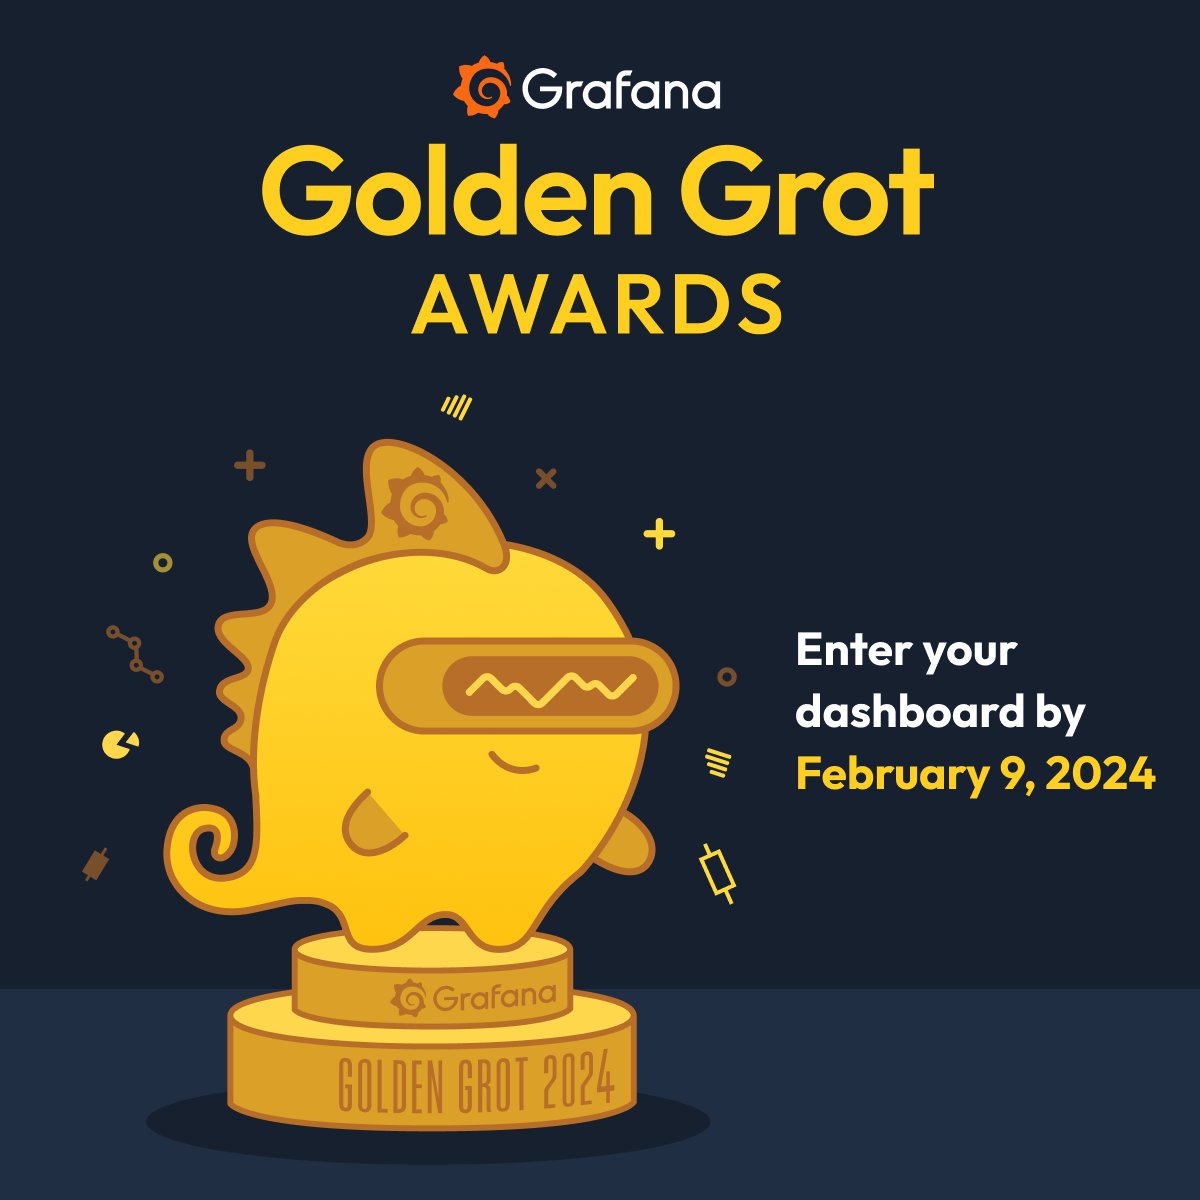 From monitoring moon landings to smart home devices, we've seen some AWESOME #Grafana dashboards out there & we want to recognize YOU! If you've created a personal or professional dashboard that you're proud of, apply for the #GoldenGrot Awards by Feb. 9: bit.ly/47IUWWM…